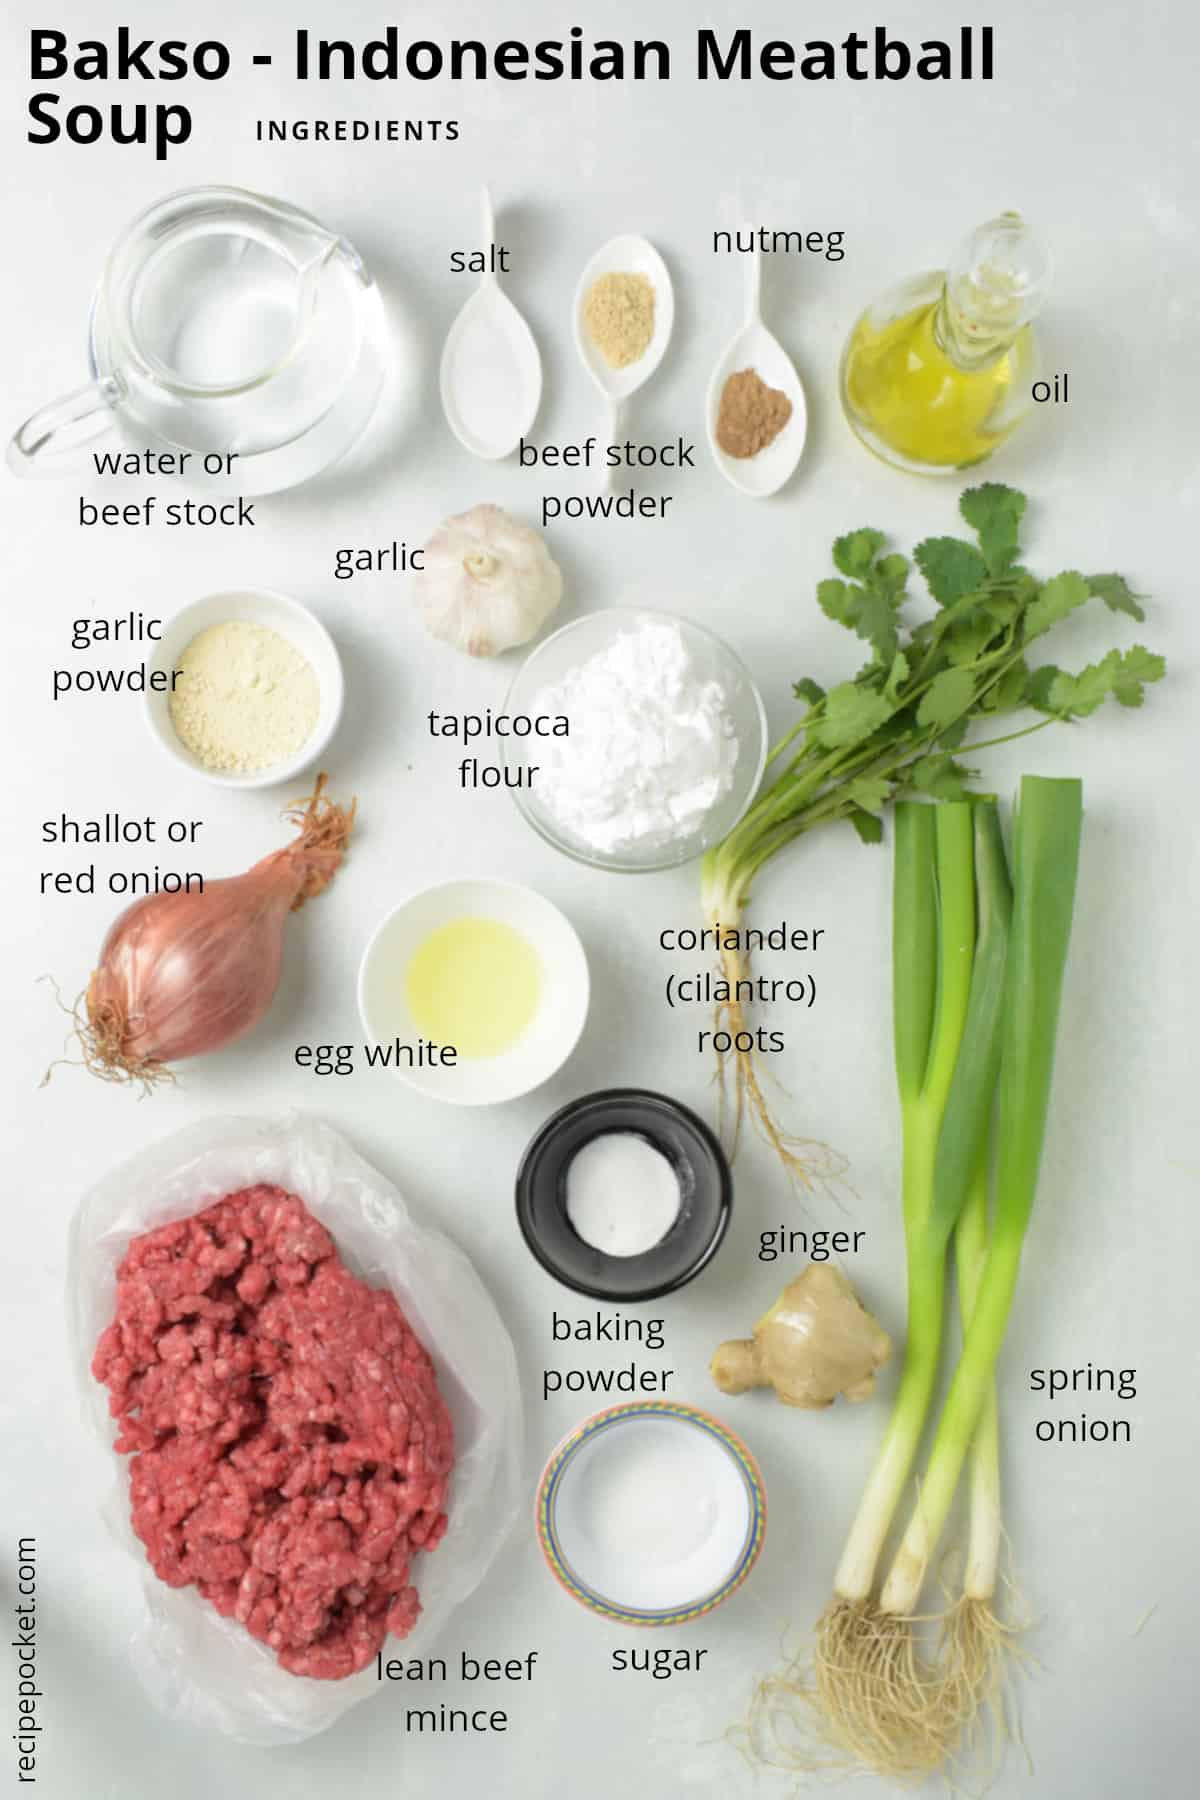 Ingredients photo for bakso soup.